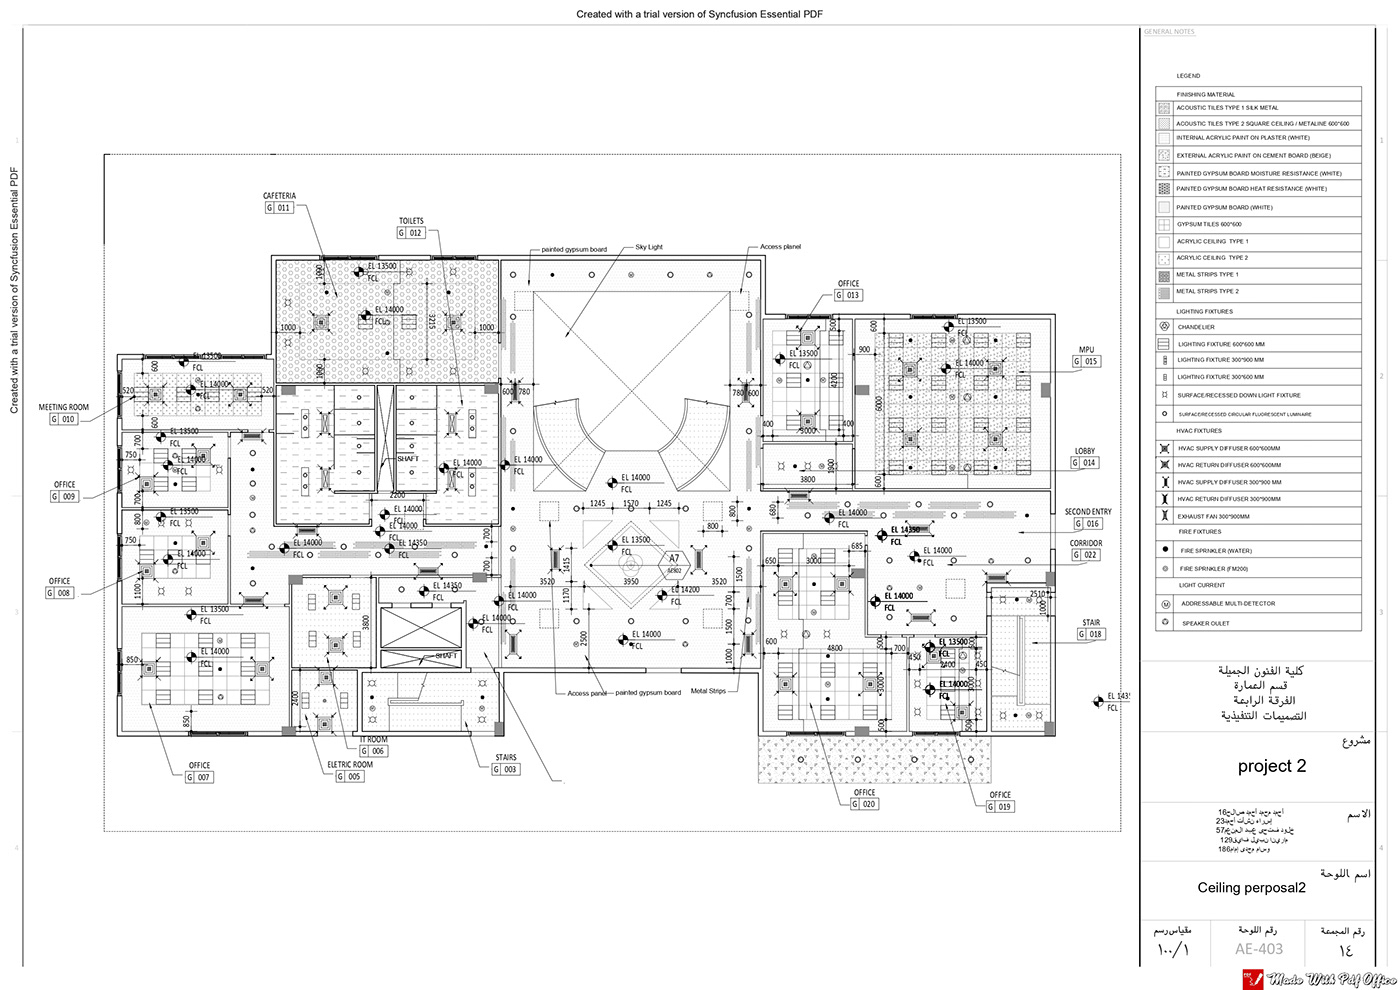 administrative cad design Shop Drawings working